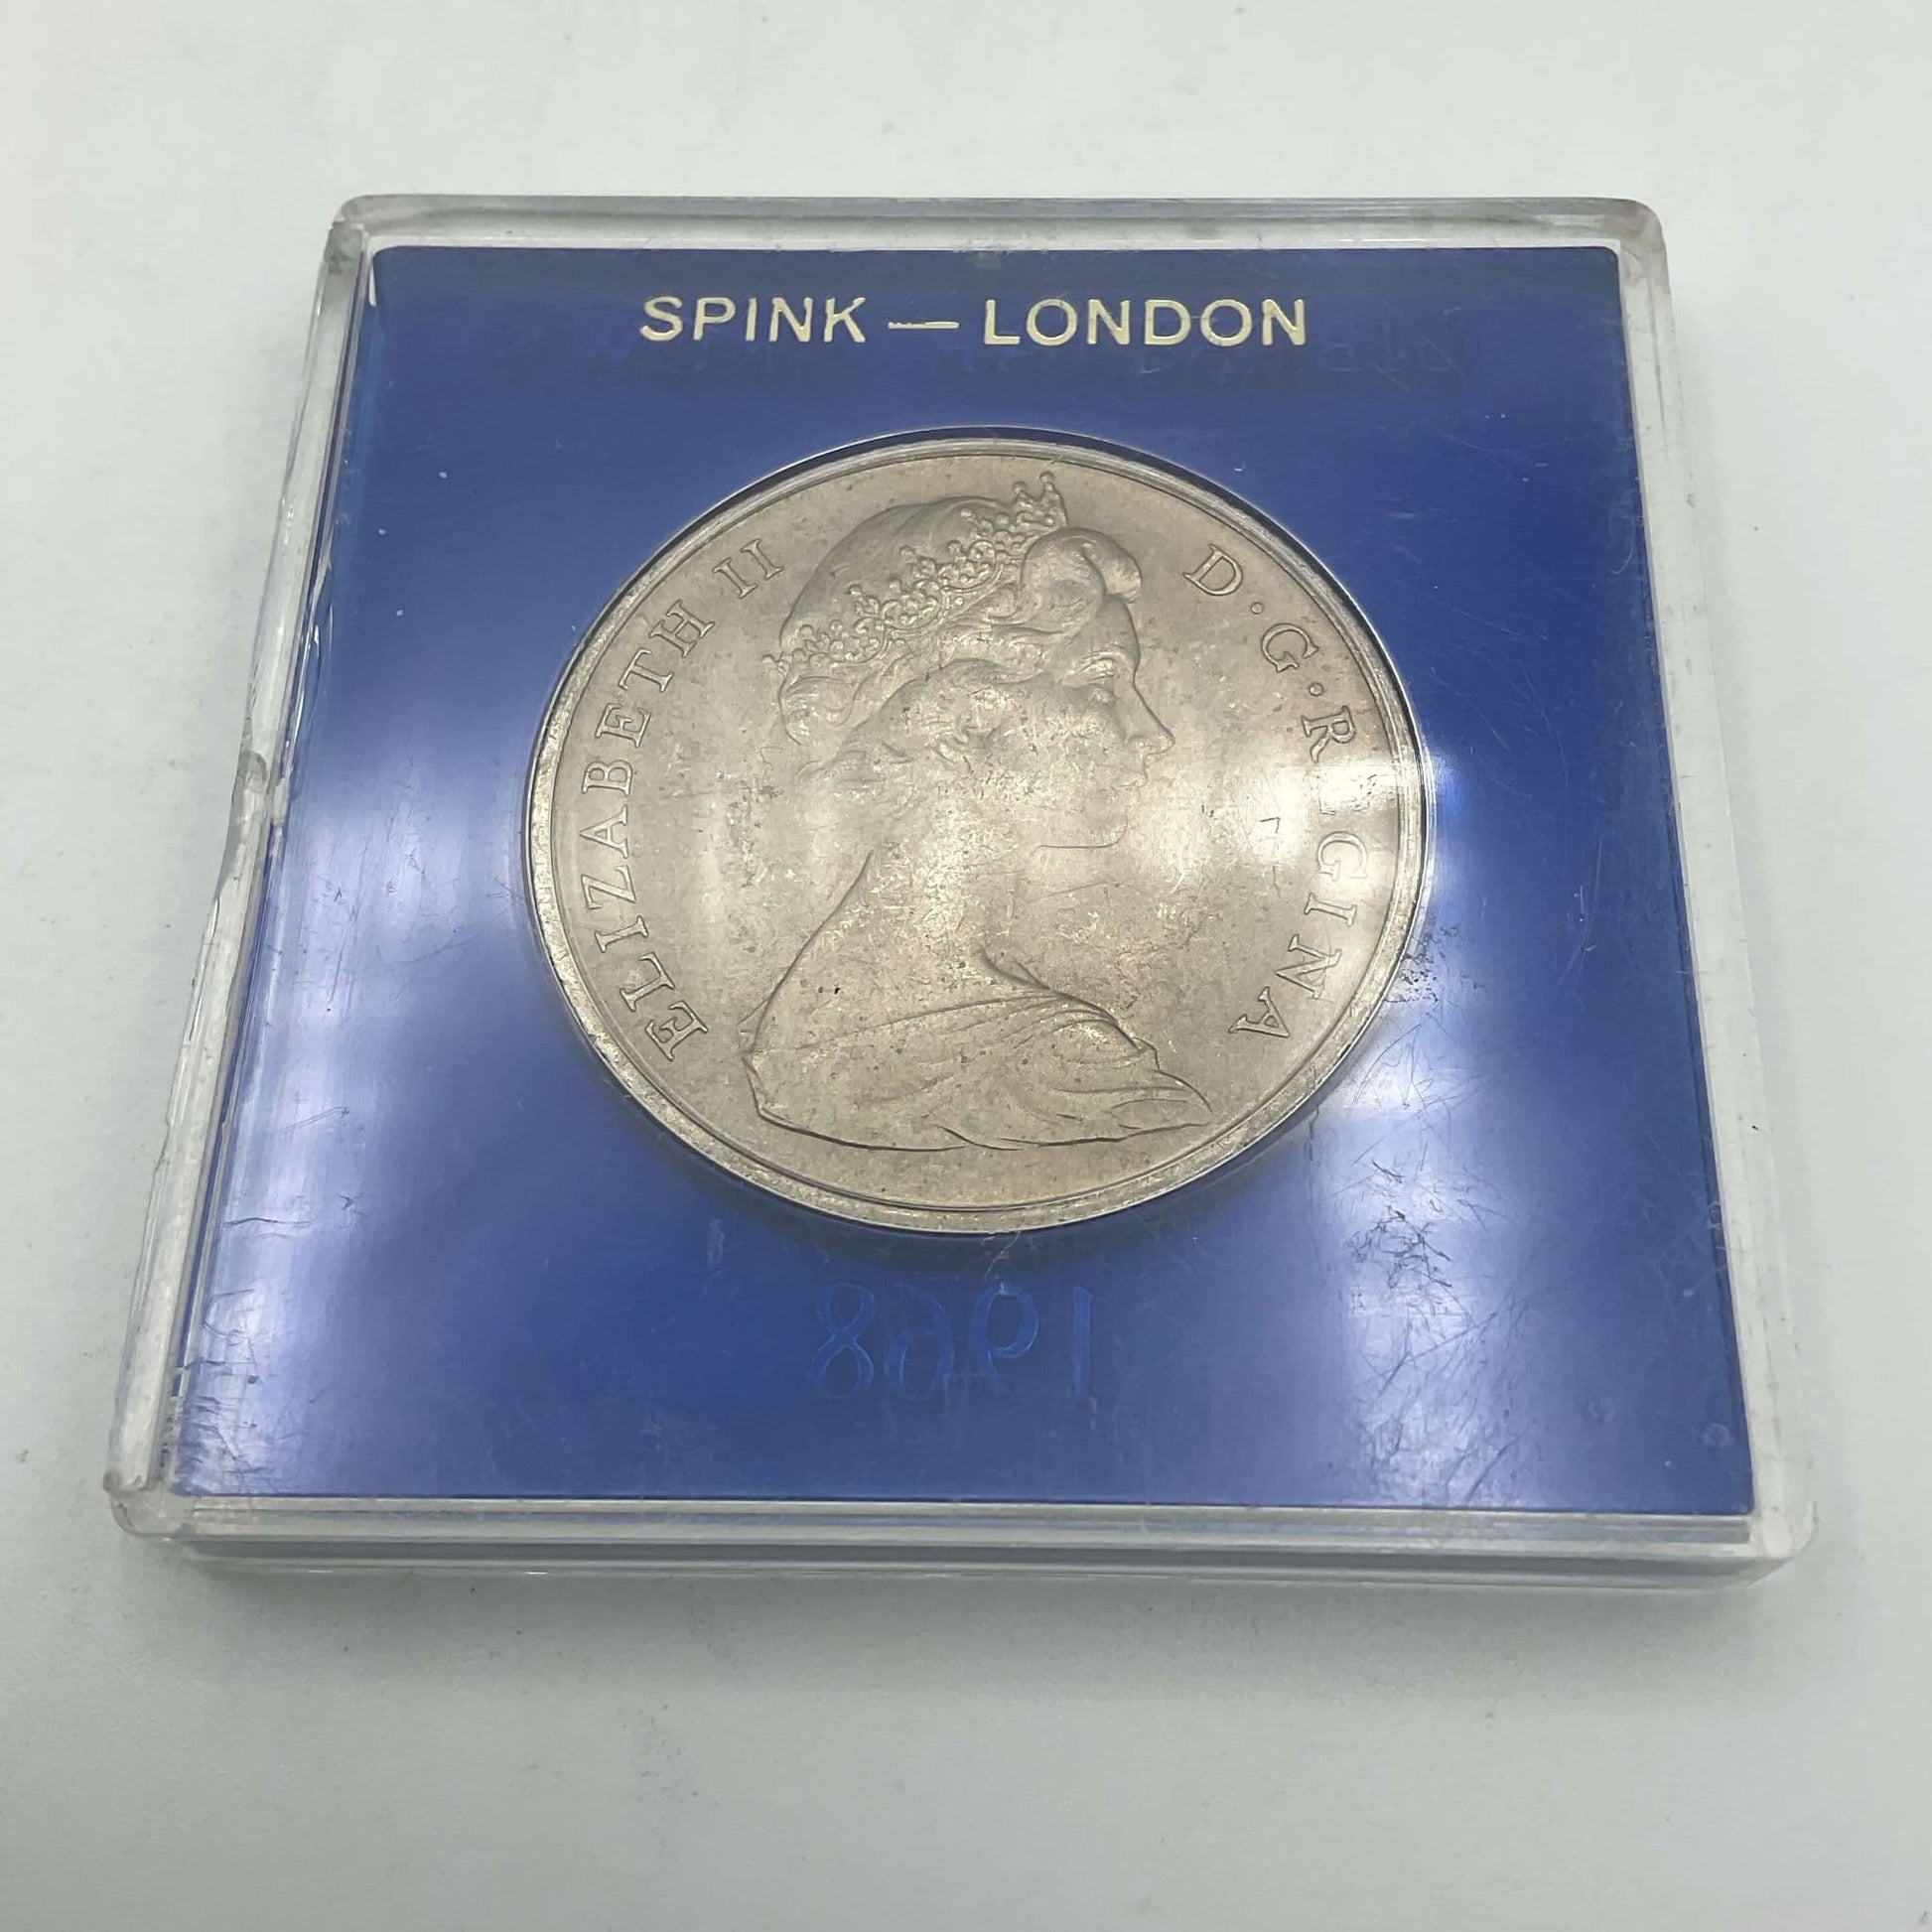 Silver Gibraltar Crown coin in a blue case Reverse side